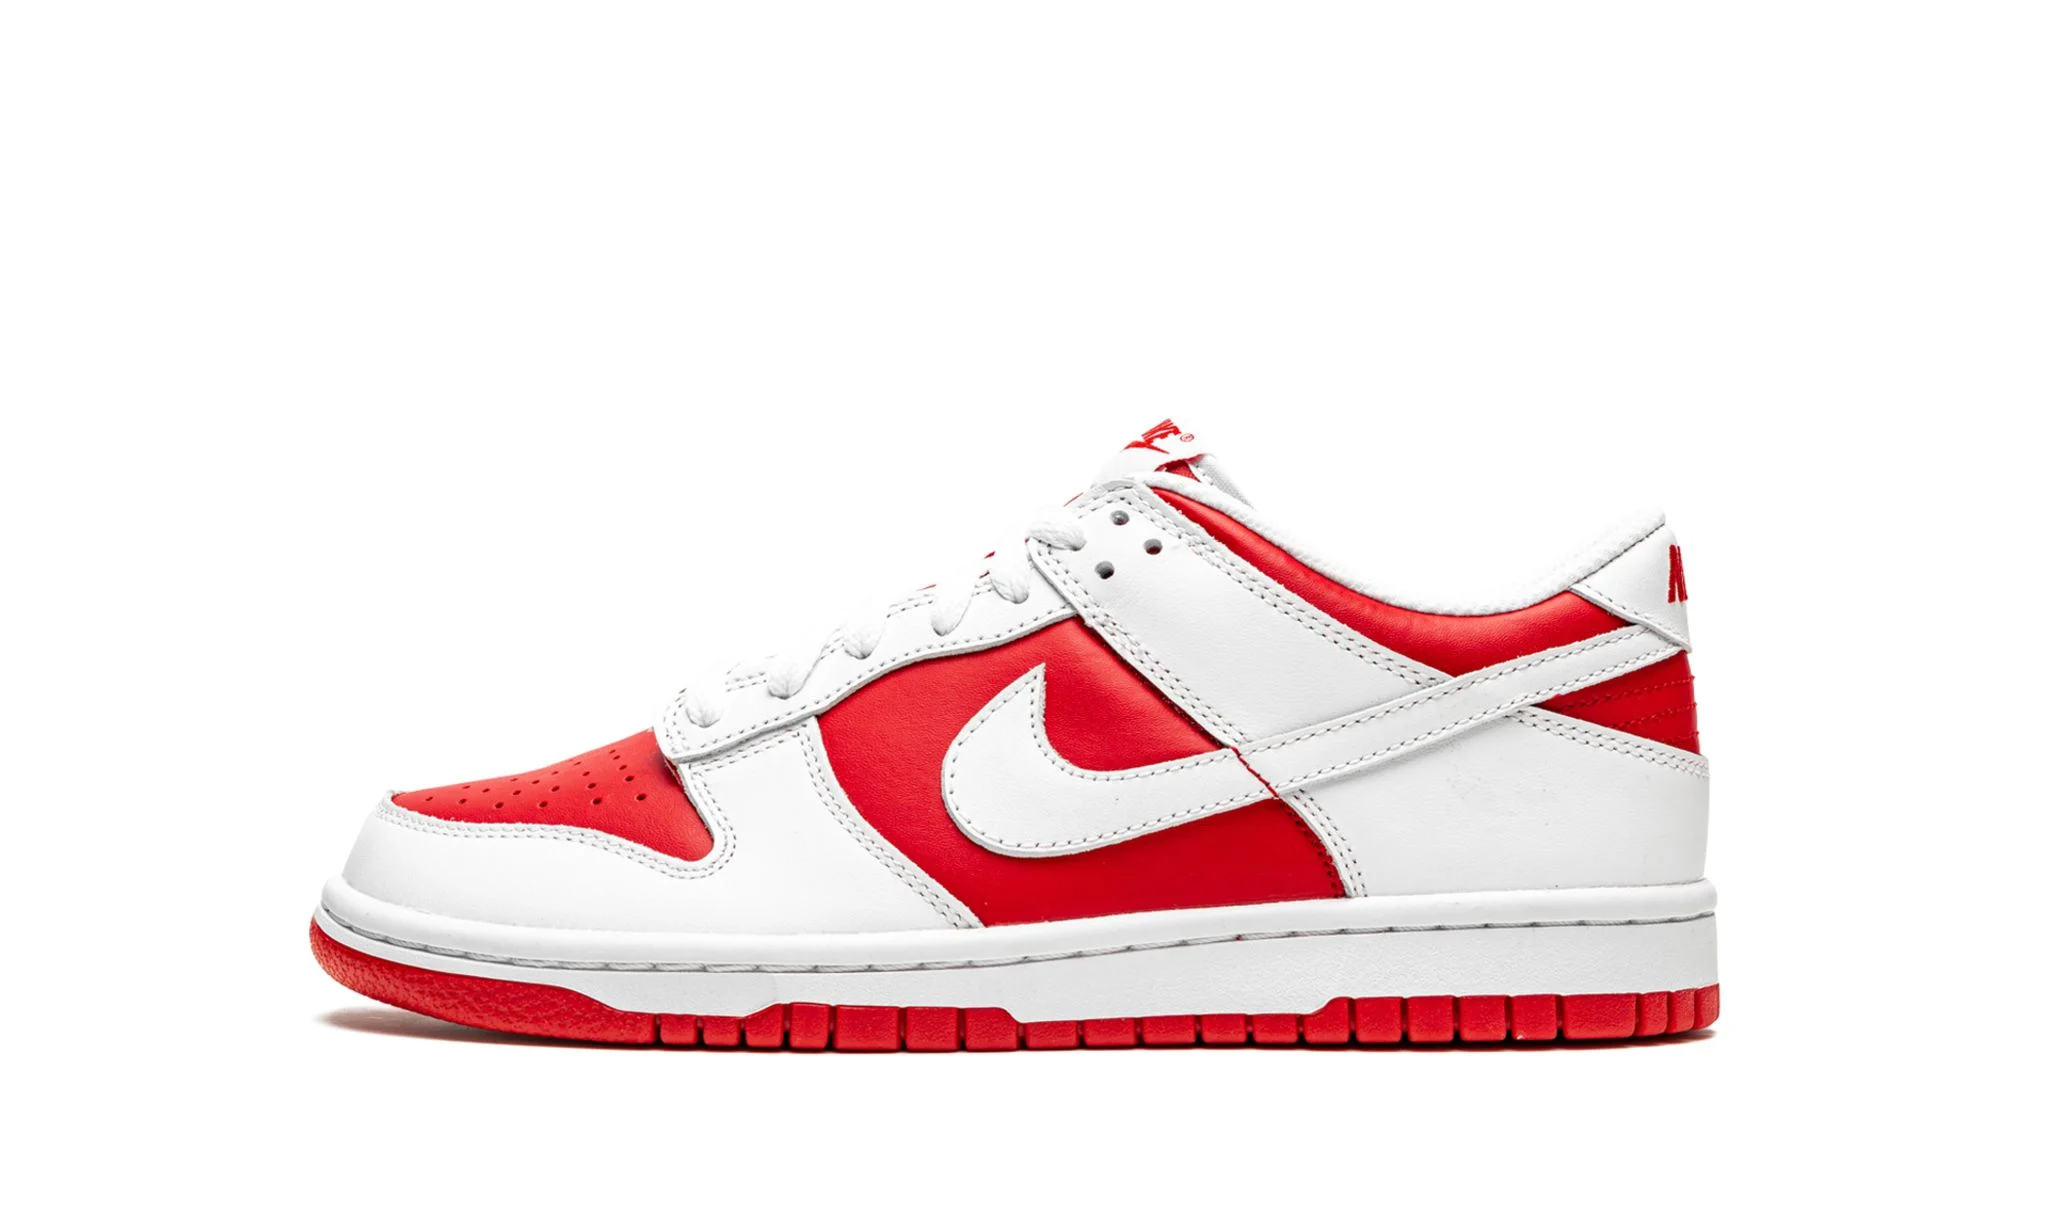 Nike Dunk Low (GS) “Championship Red”